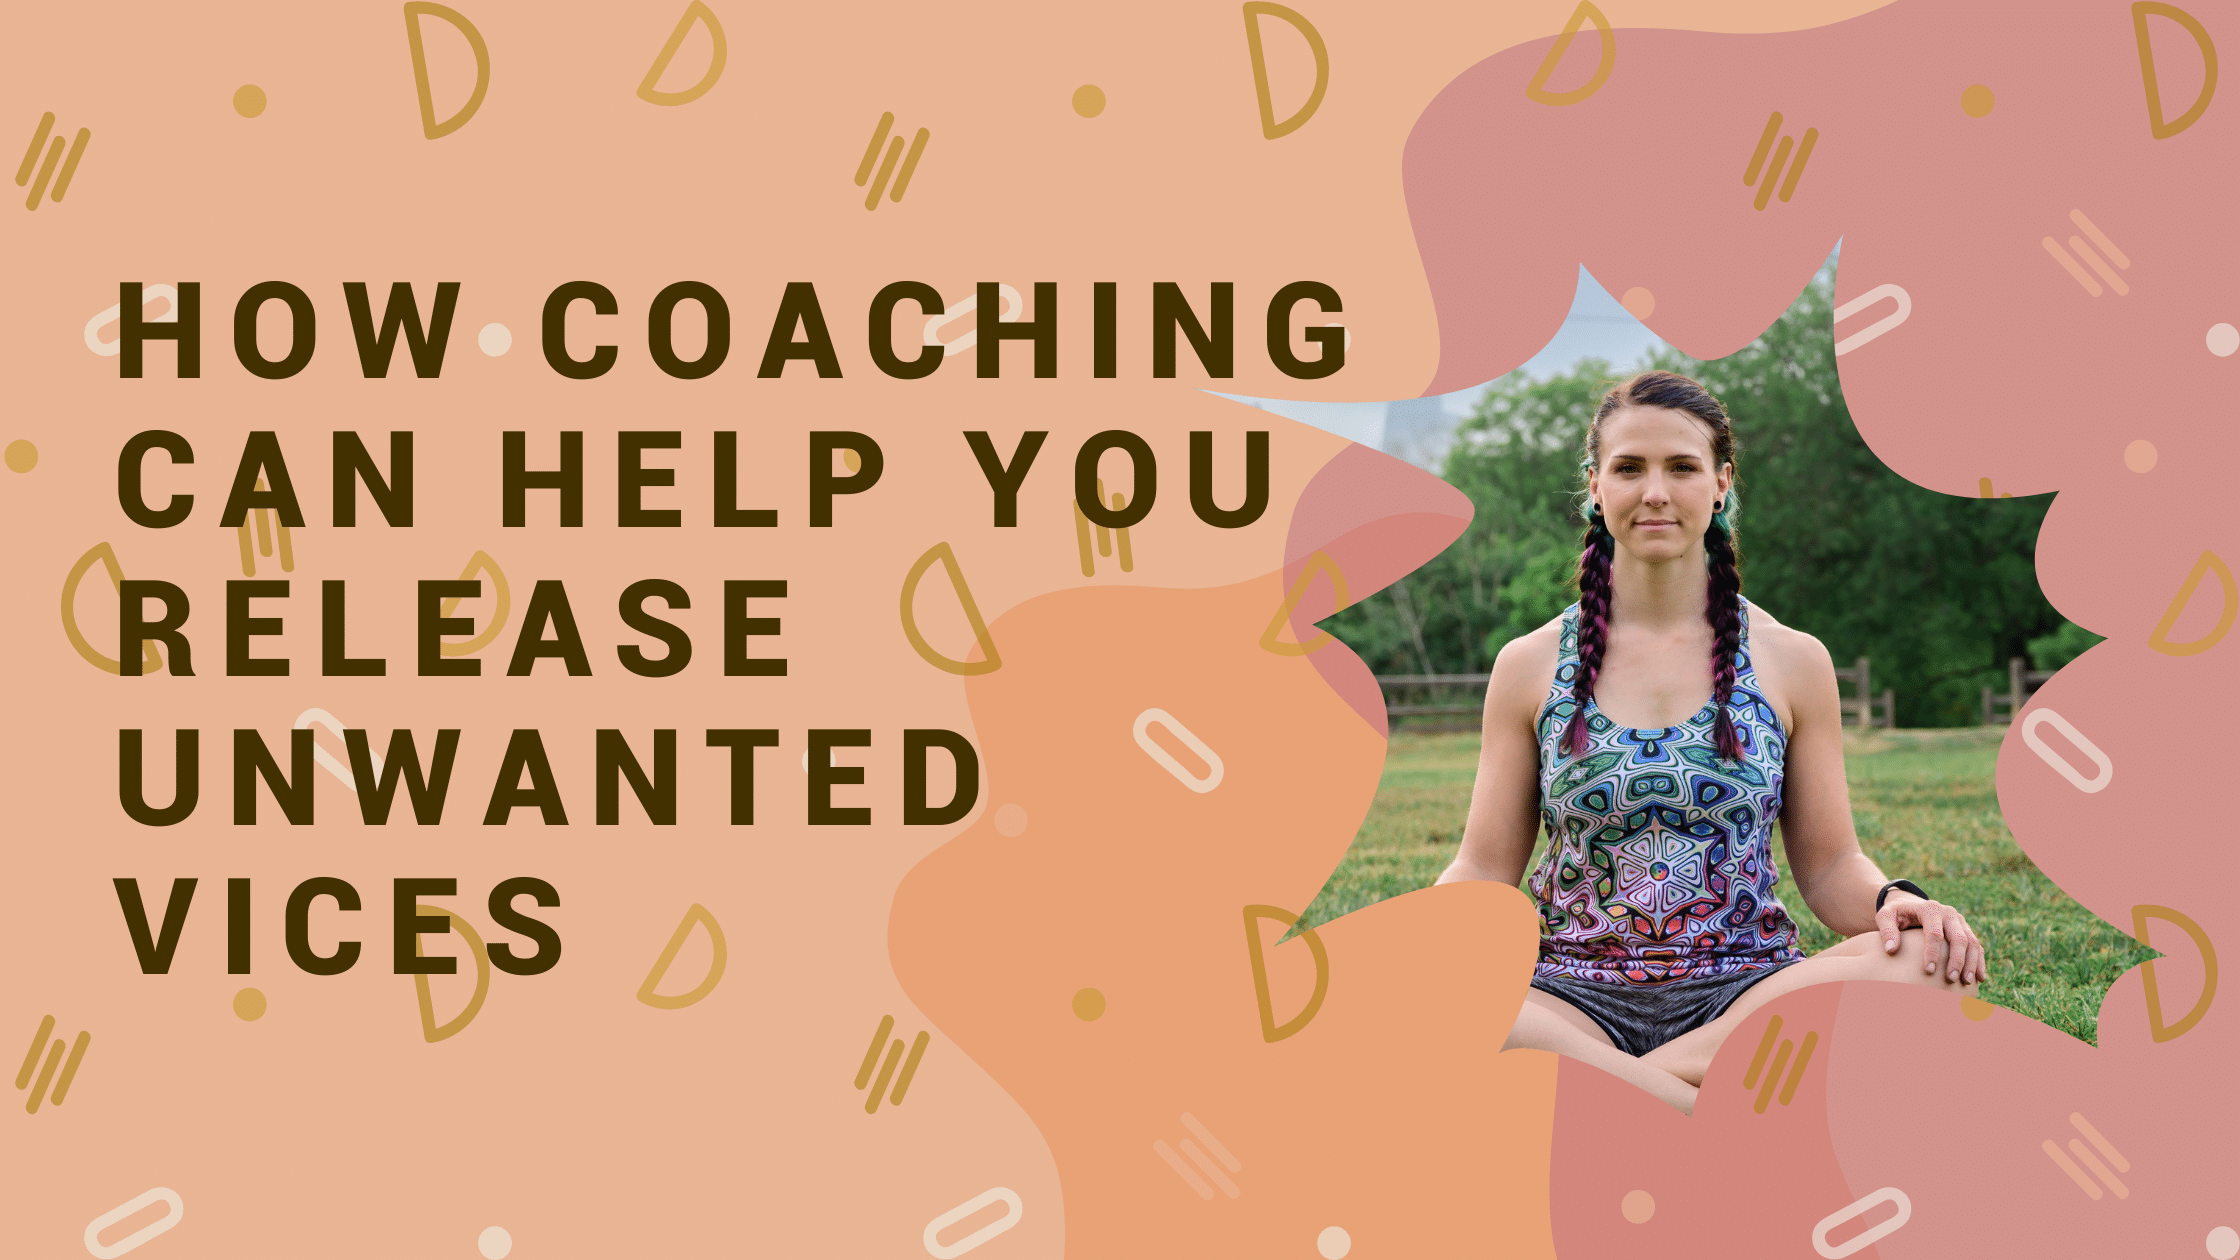 HOW COACHING CAN HELP YOU RELEASE UNWANTED VICES